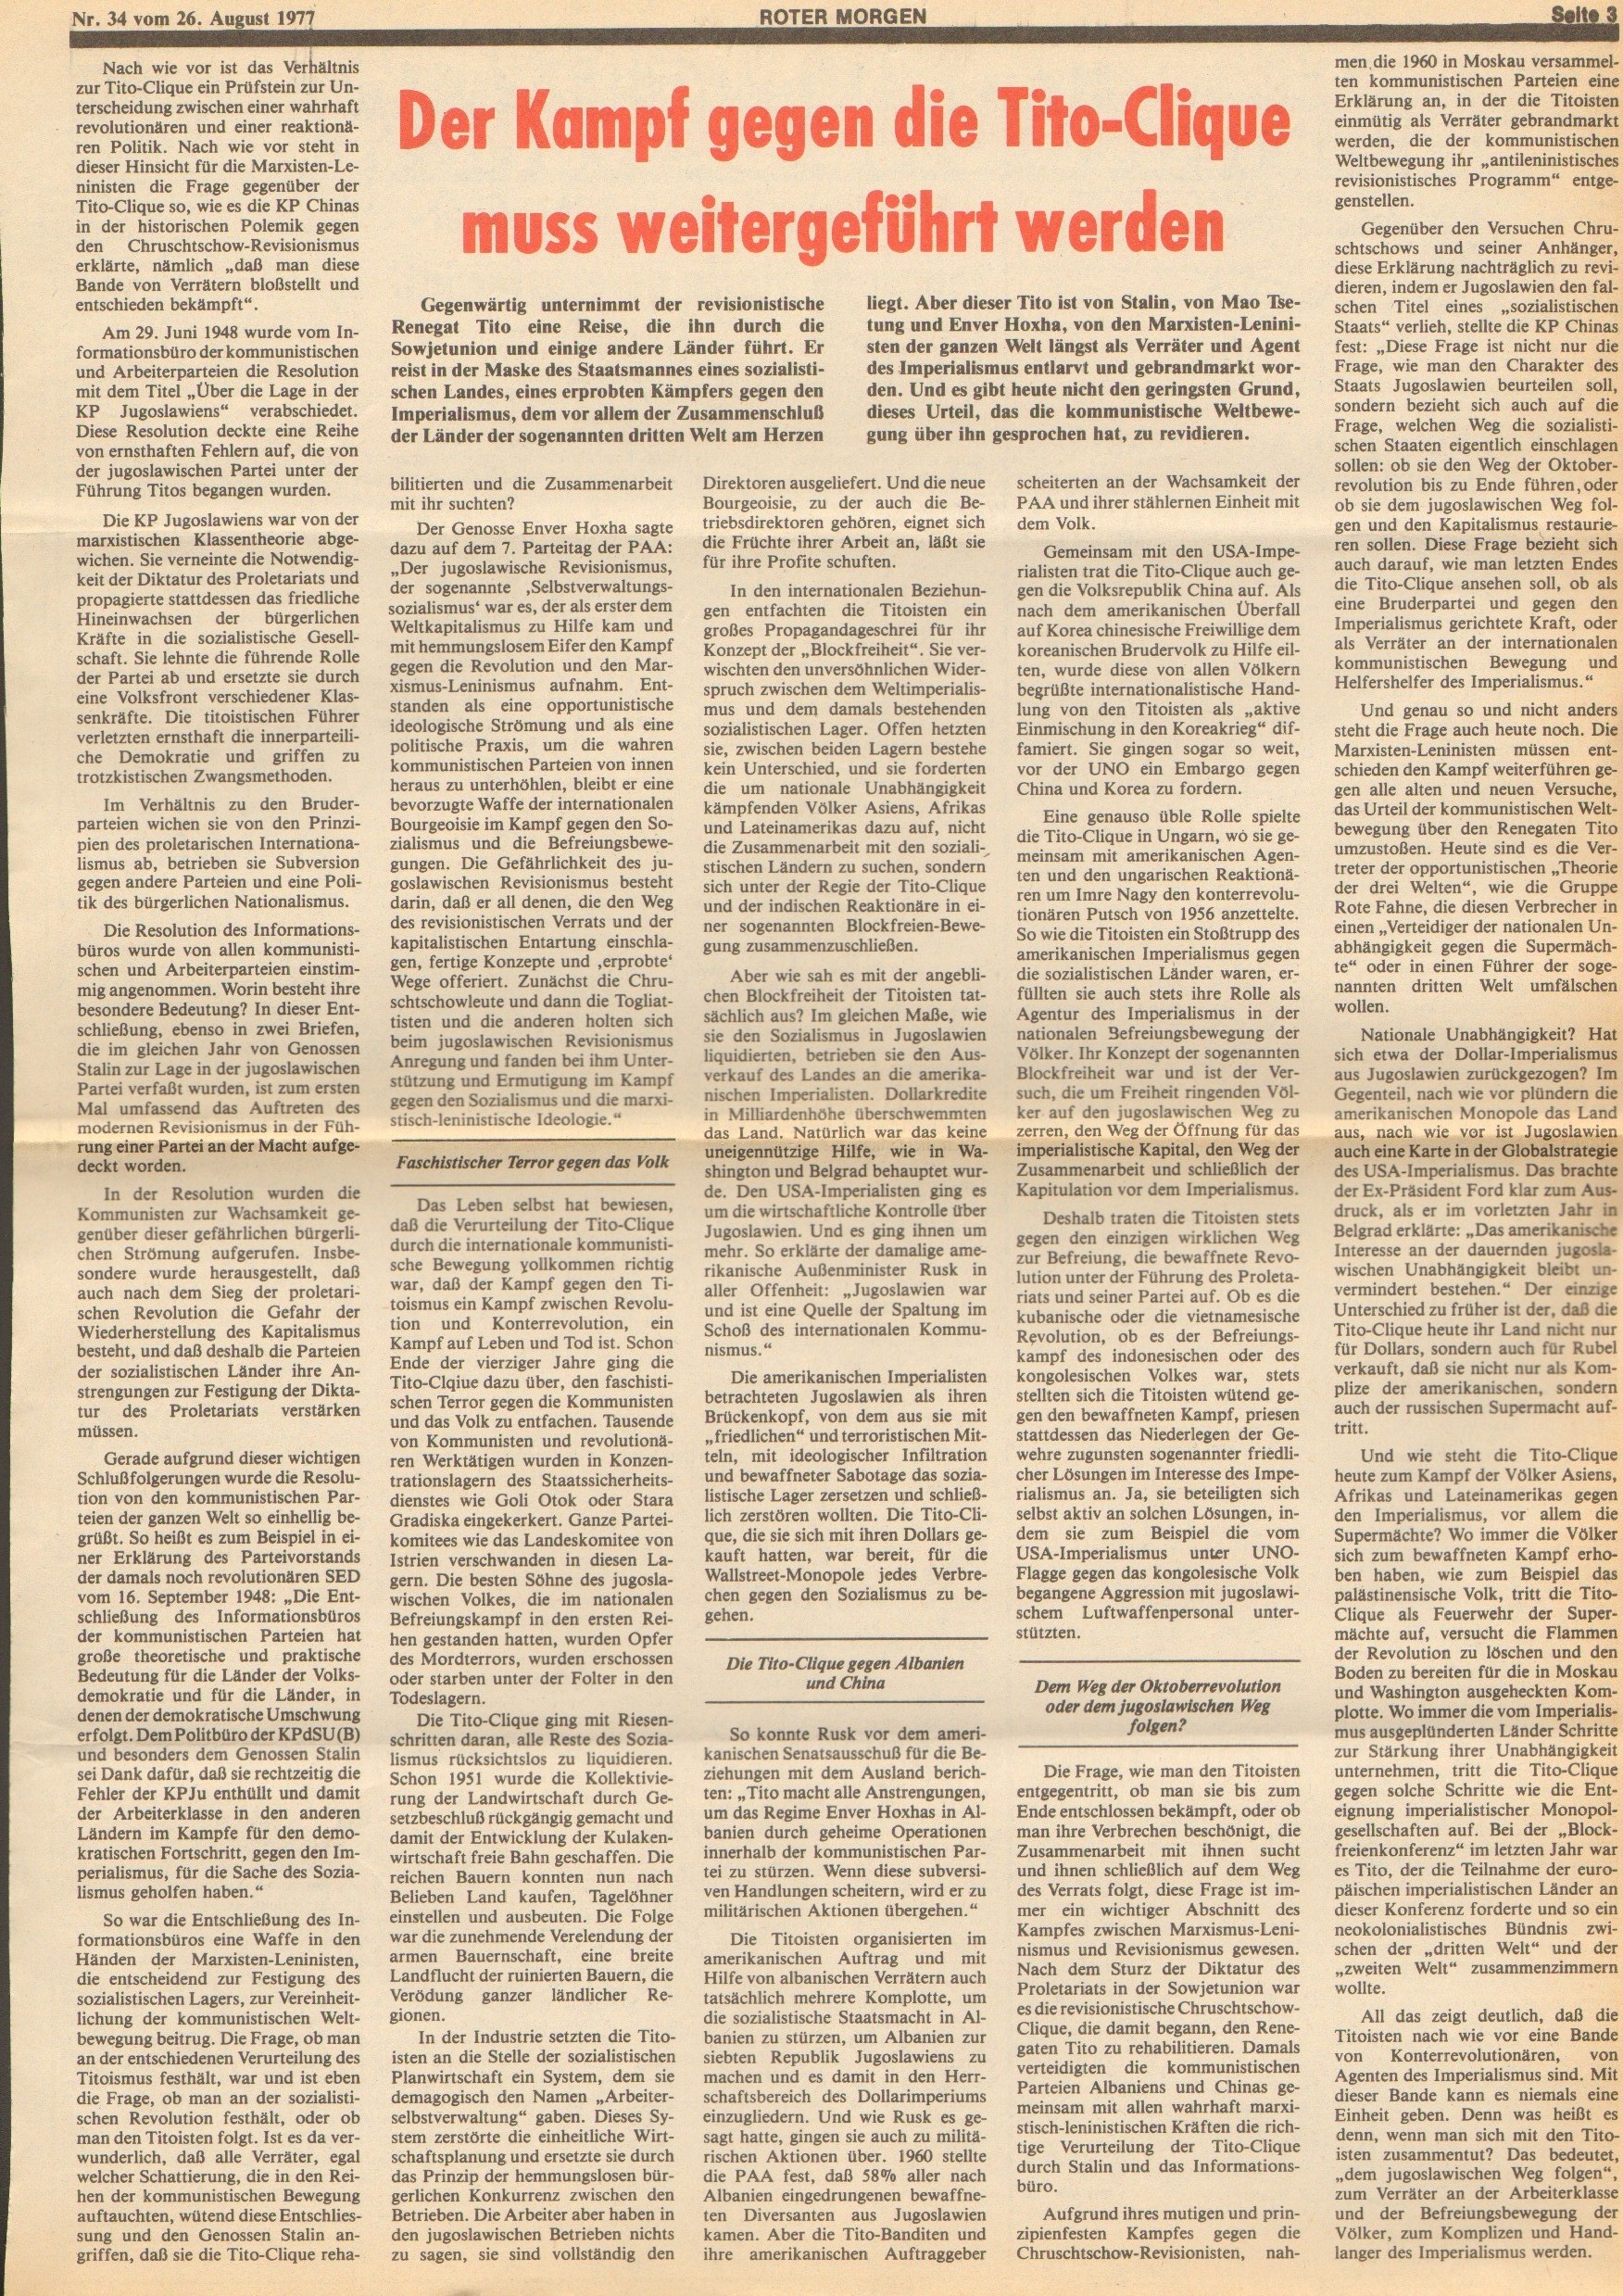 Roter Morgen, 11. Jg., 26. August 1977, Nr. 34, Seite 3